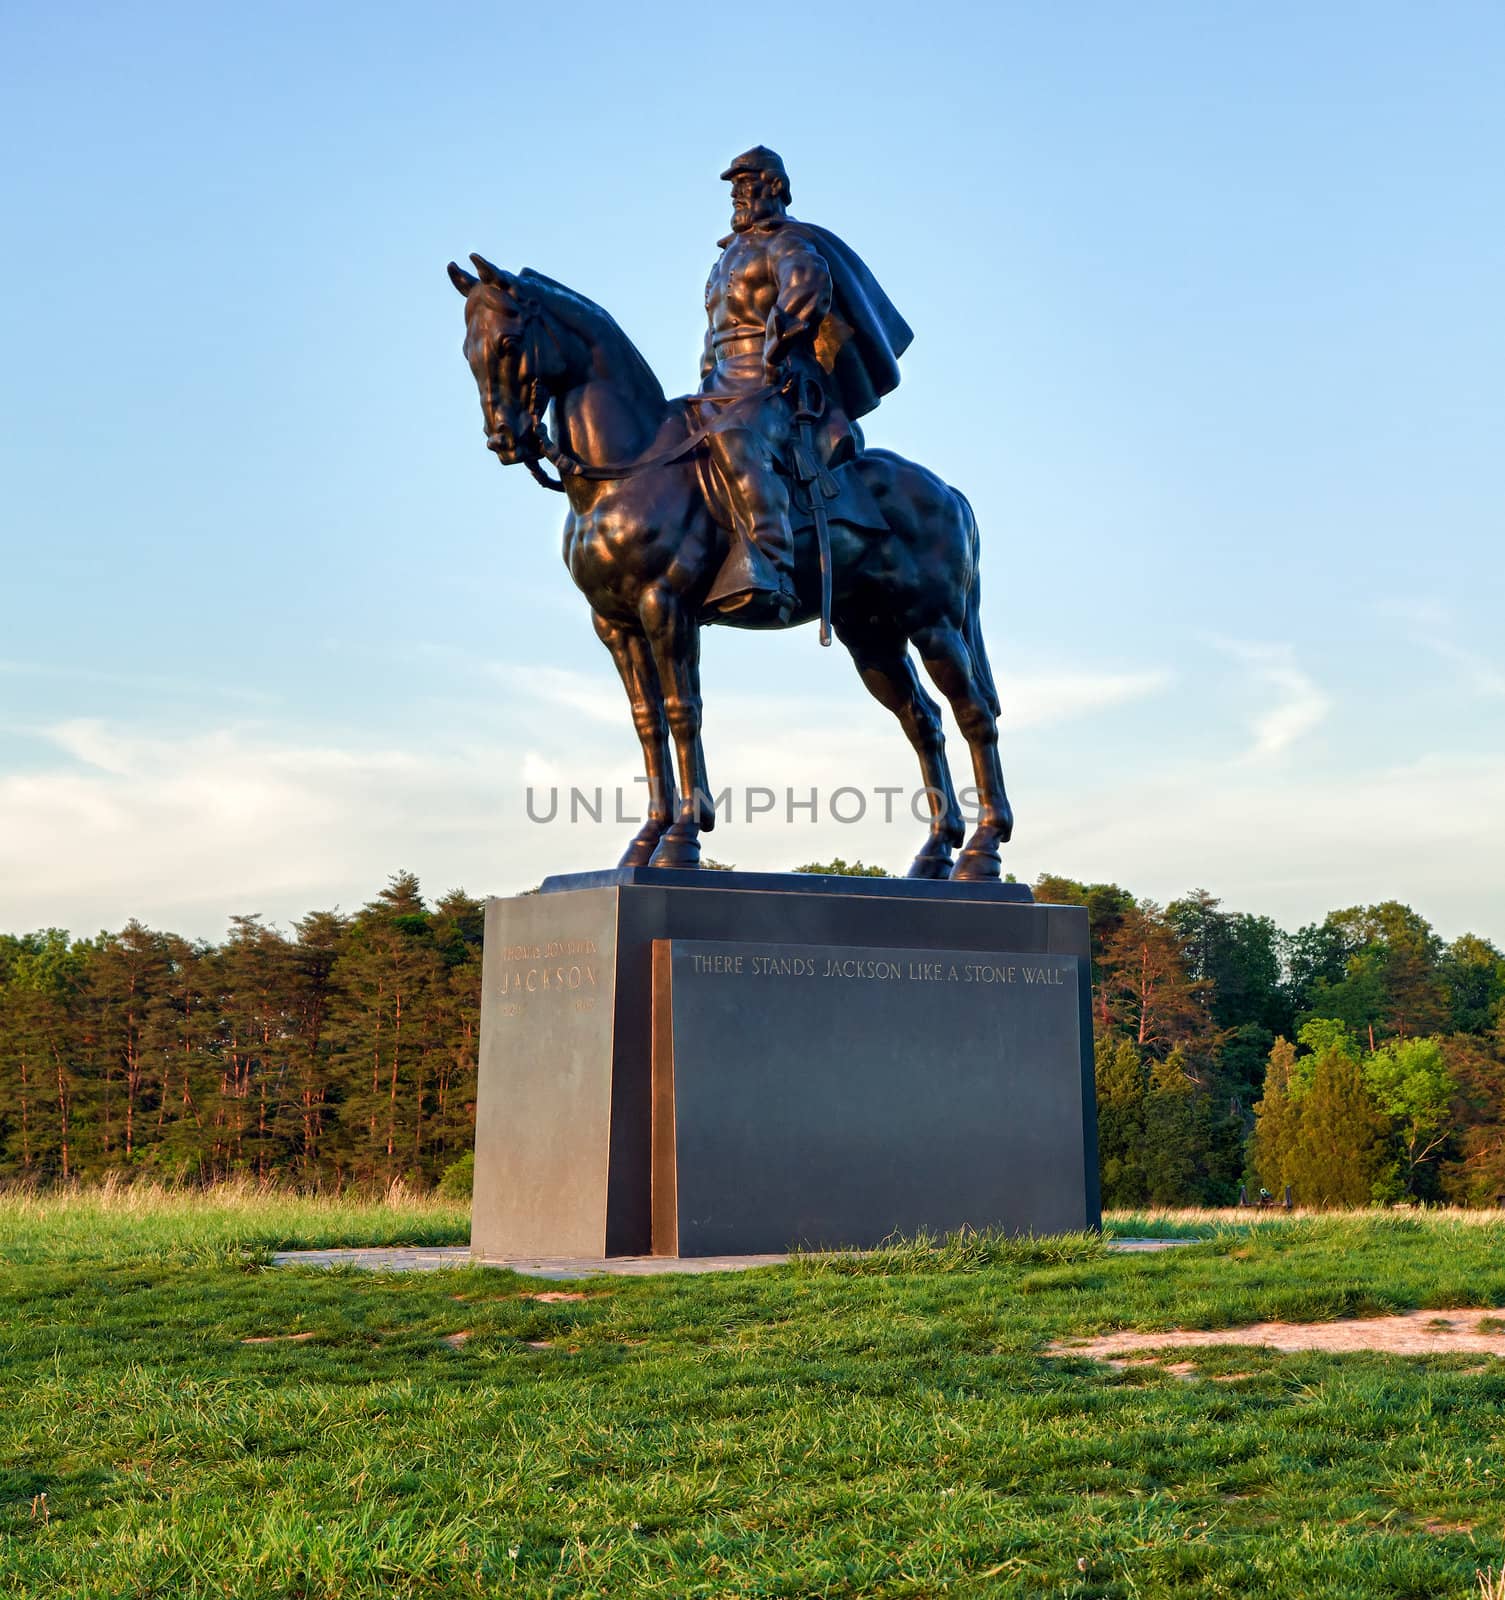 Statue of Stonewall Jackson by steheap